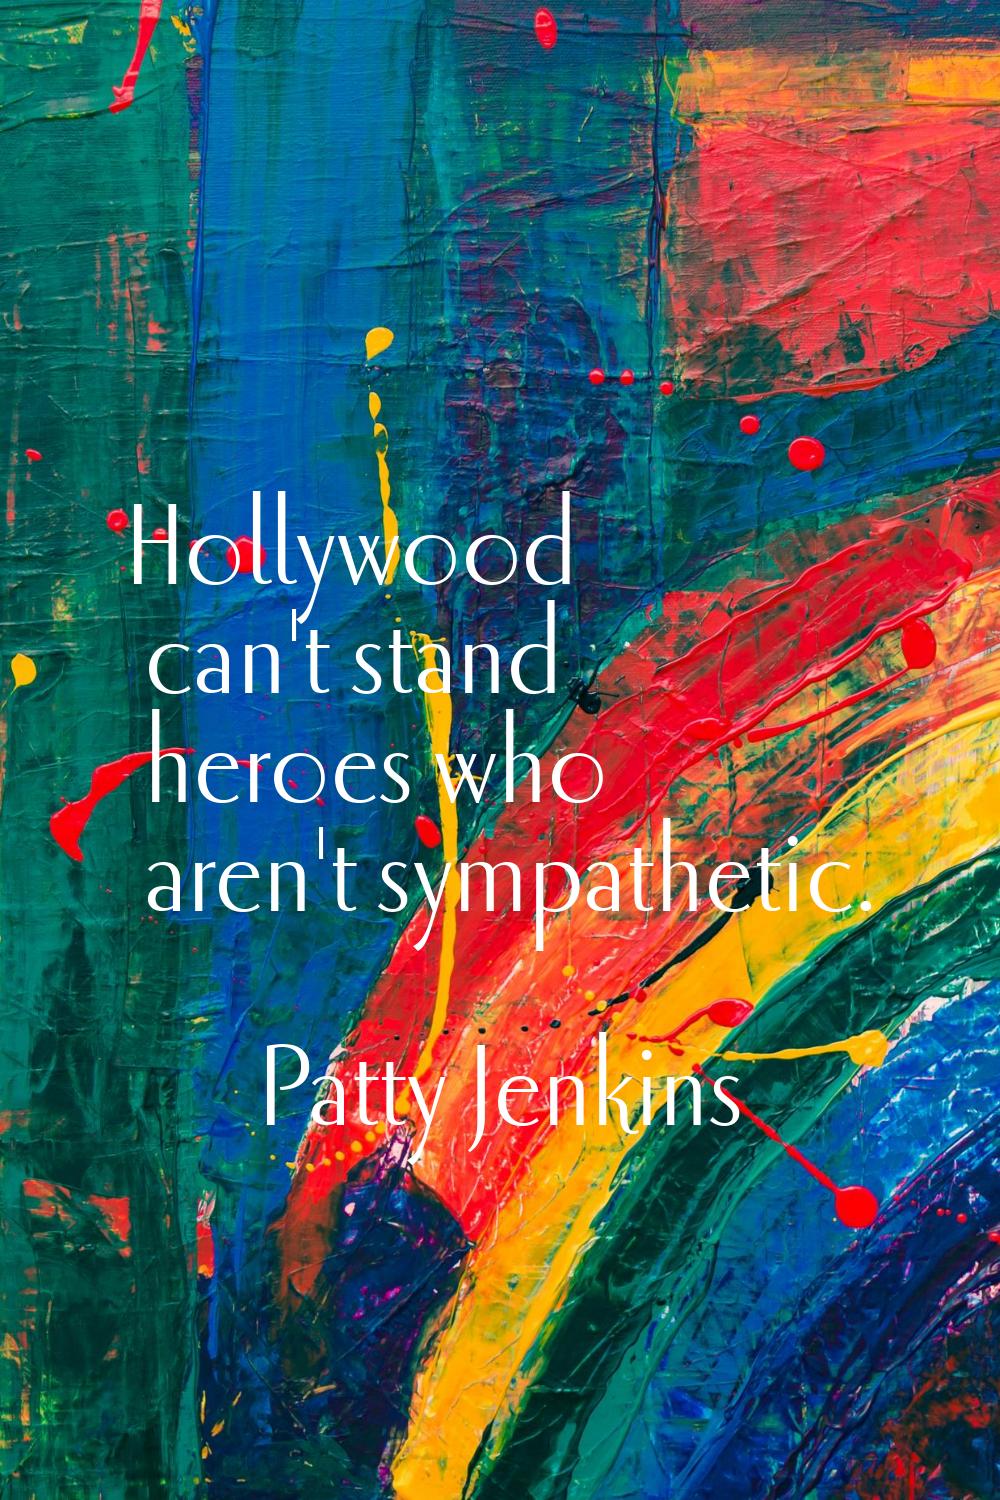 Hollywood can't stand heroes who aren't sympathetic.